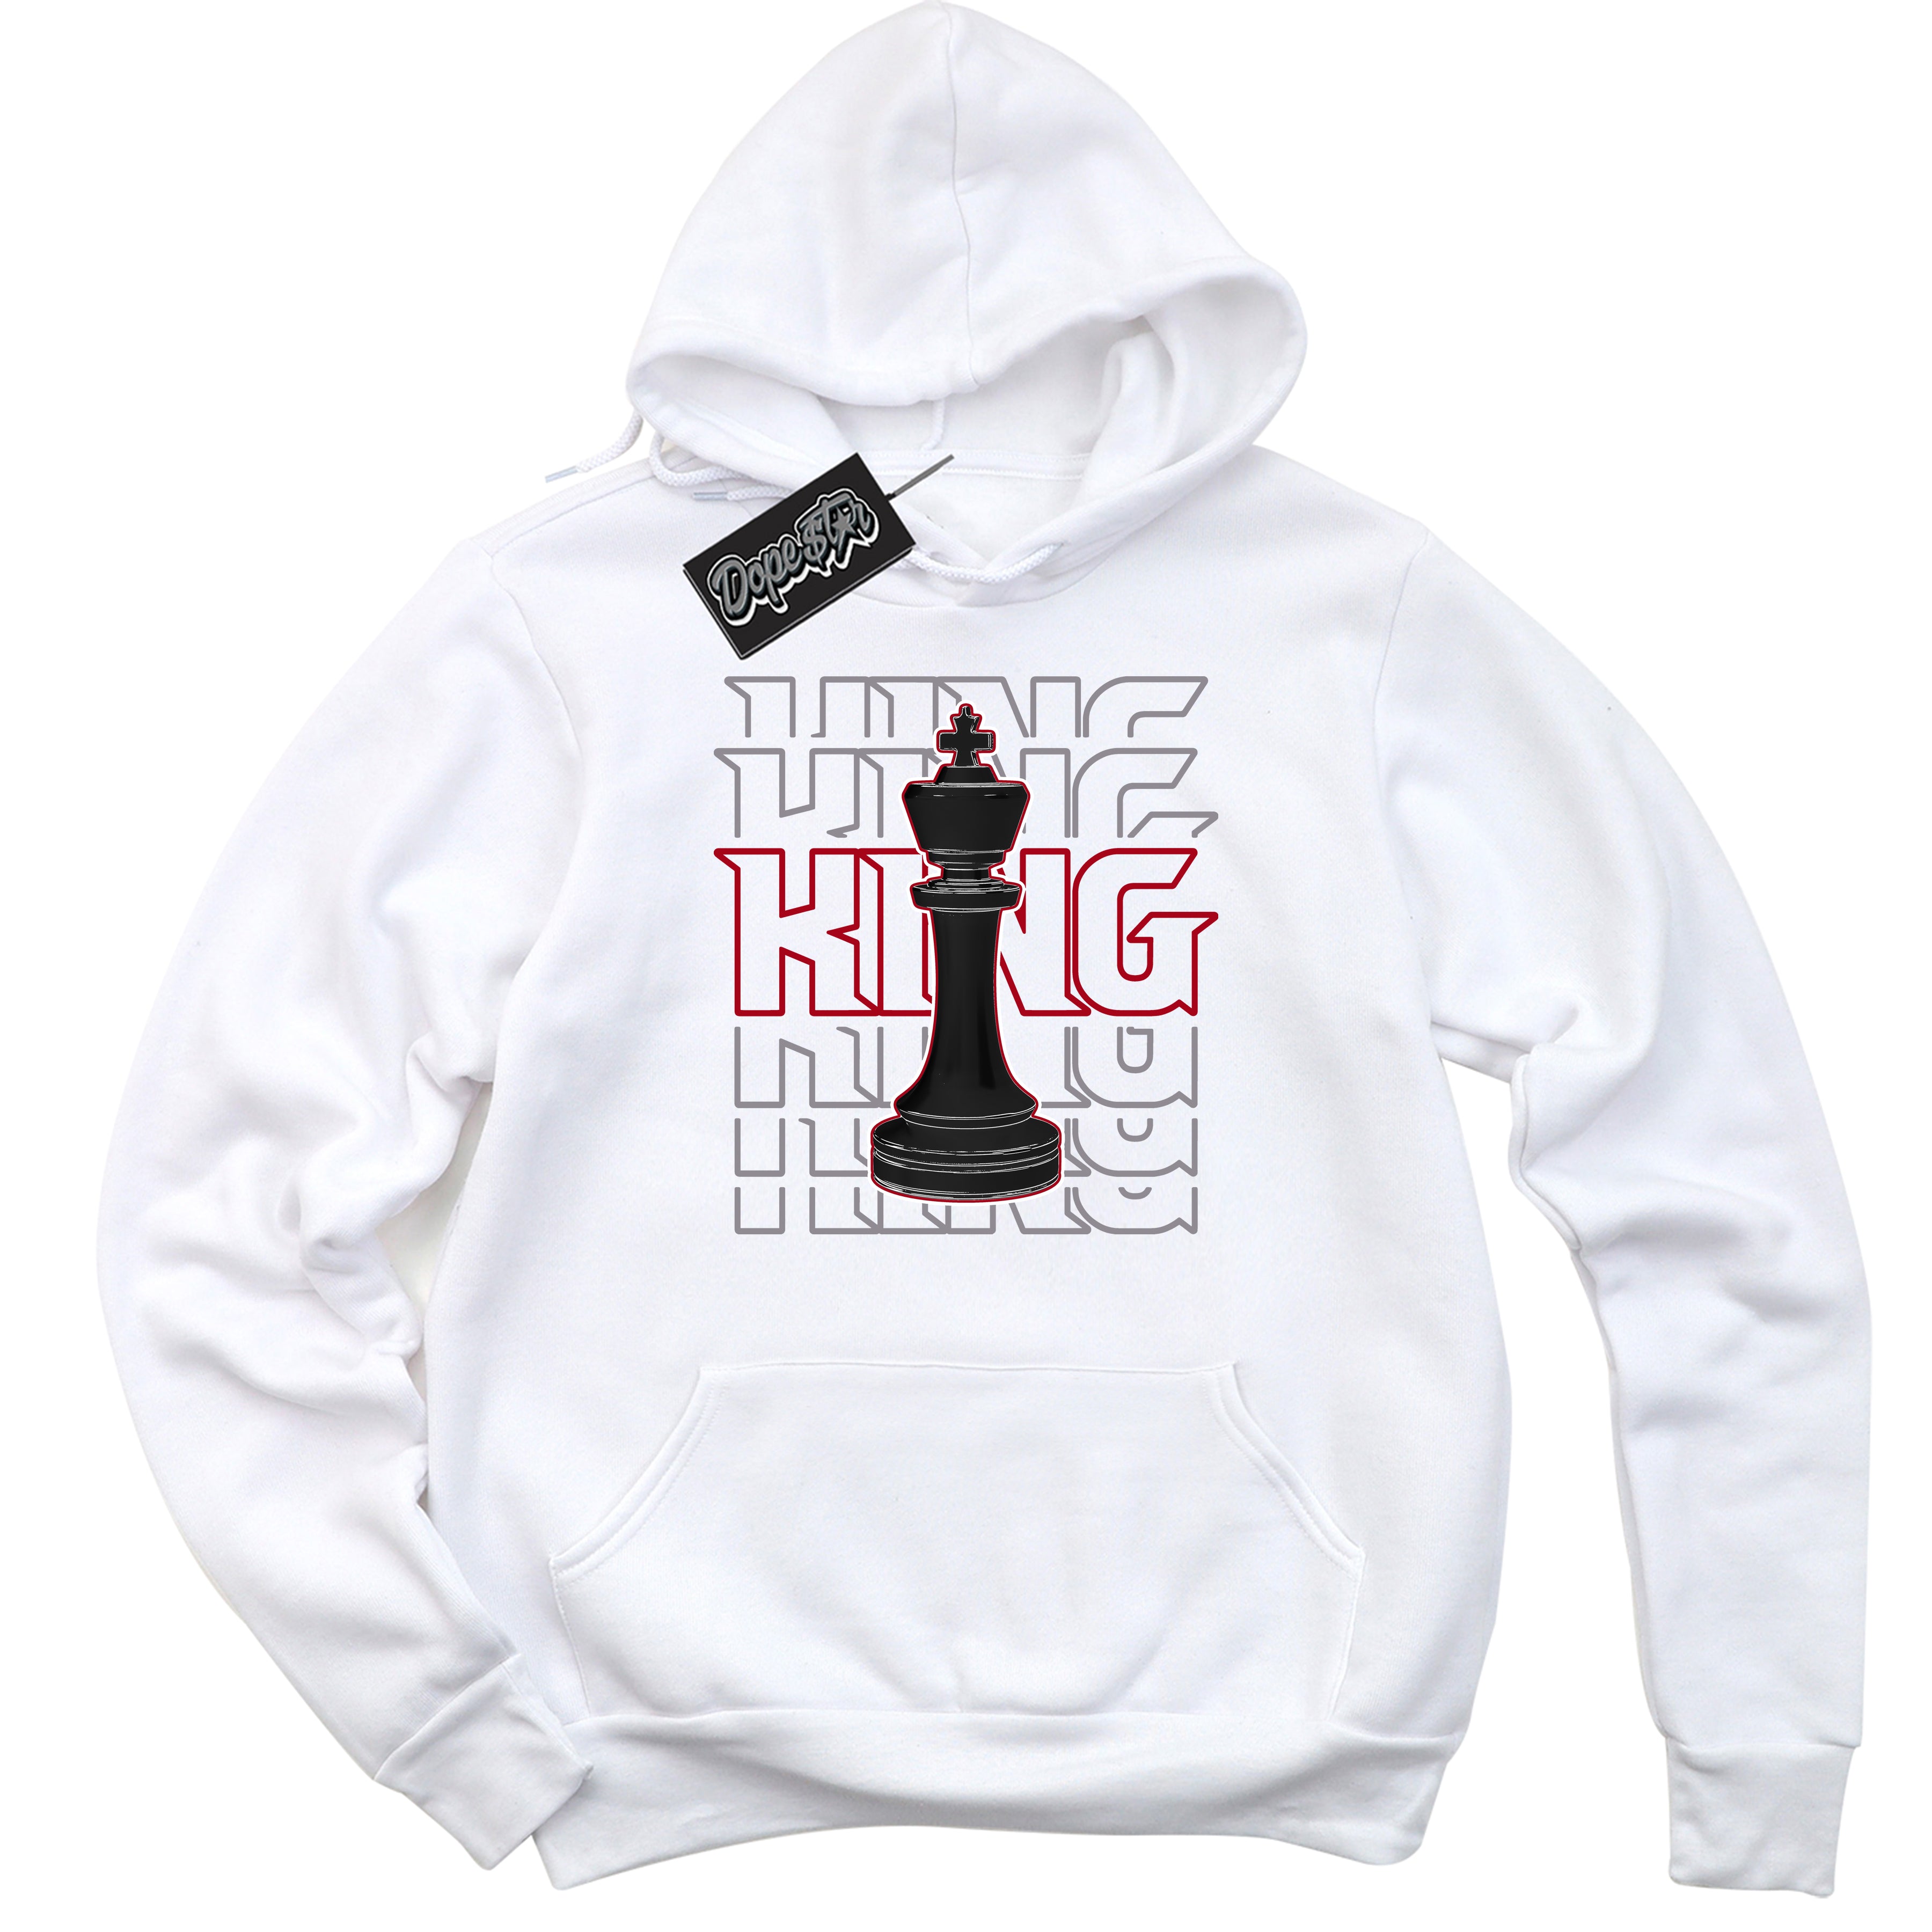 Cool White Hoodie with “ King Chess ”  design that Perfectly Matches Bred Reimagined 4s Jordans.